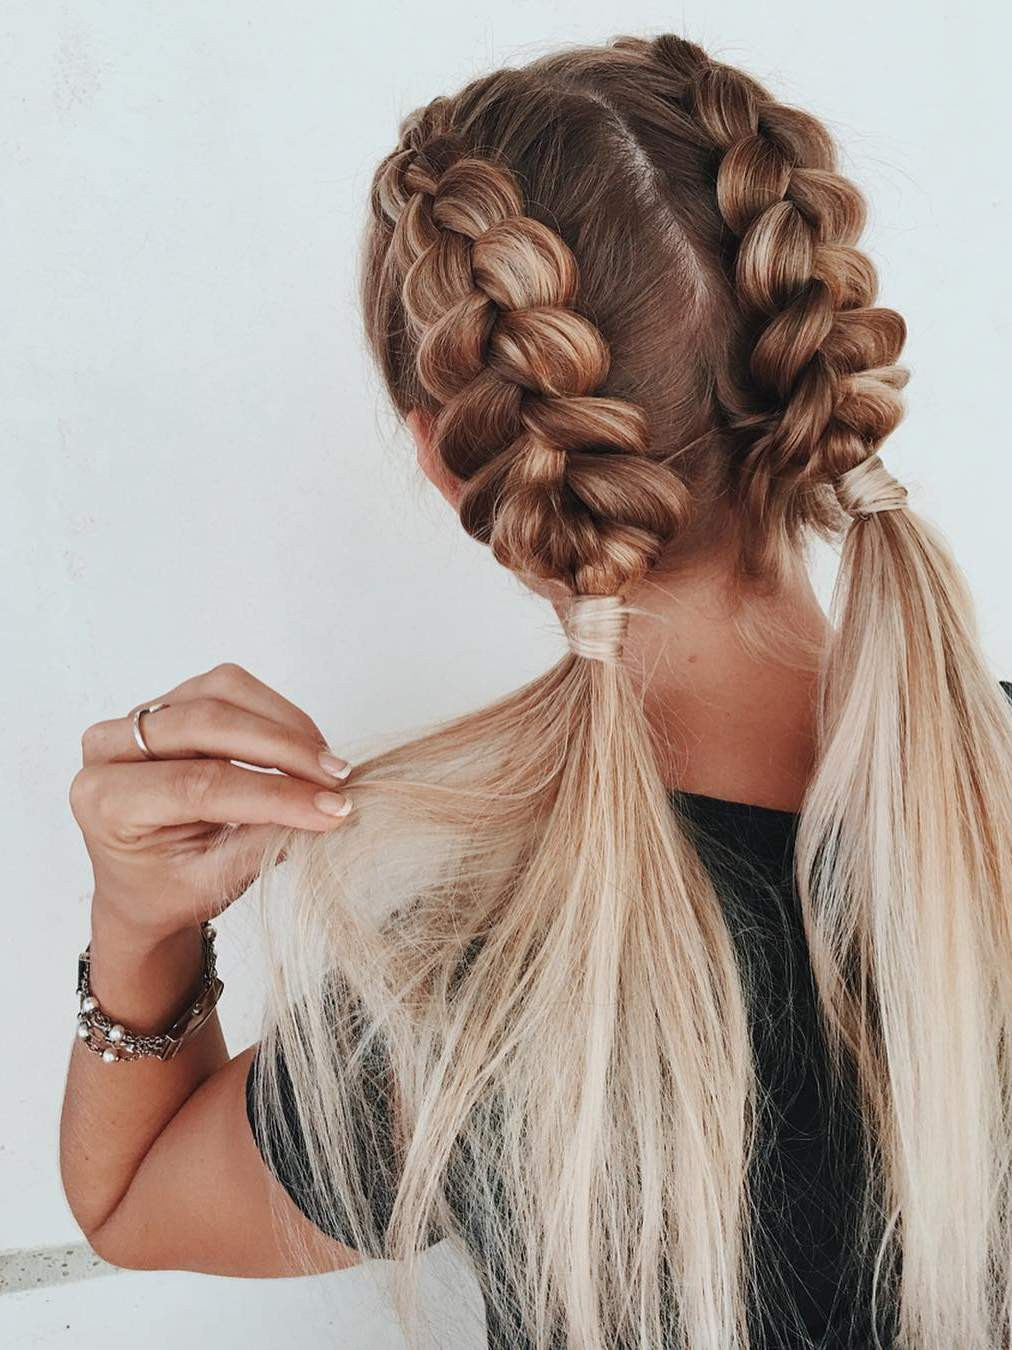 Cute Hairstyles Pinterest
 7 Braided Hairstyles That People Are Loving on Pinterest